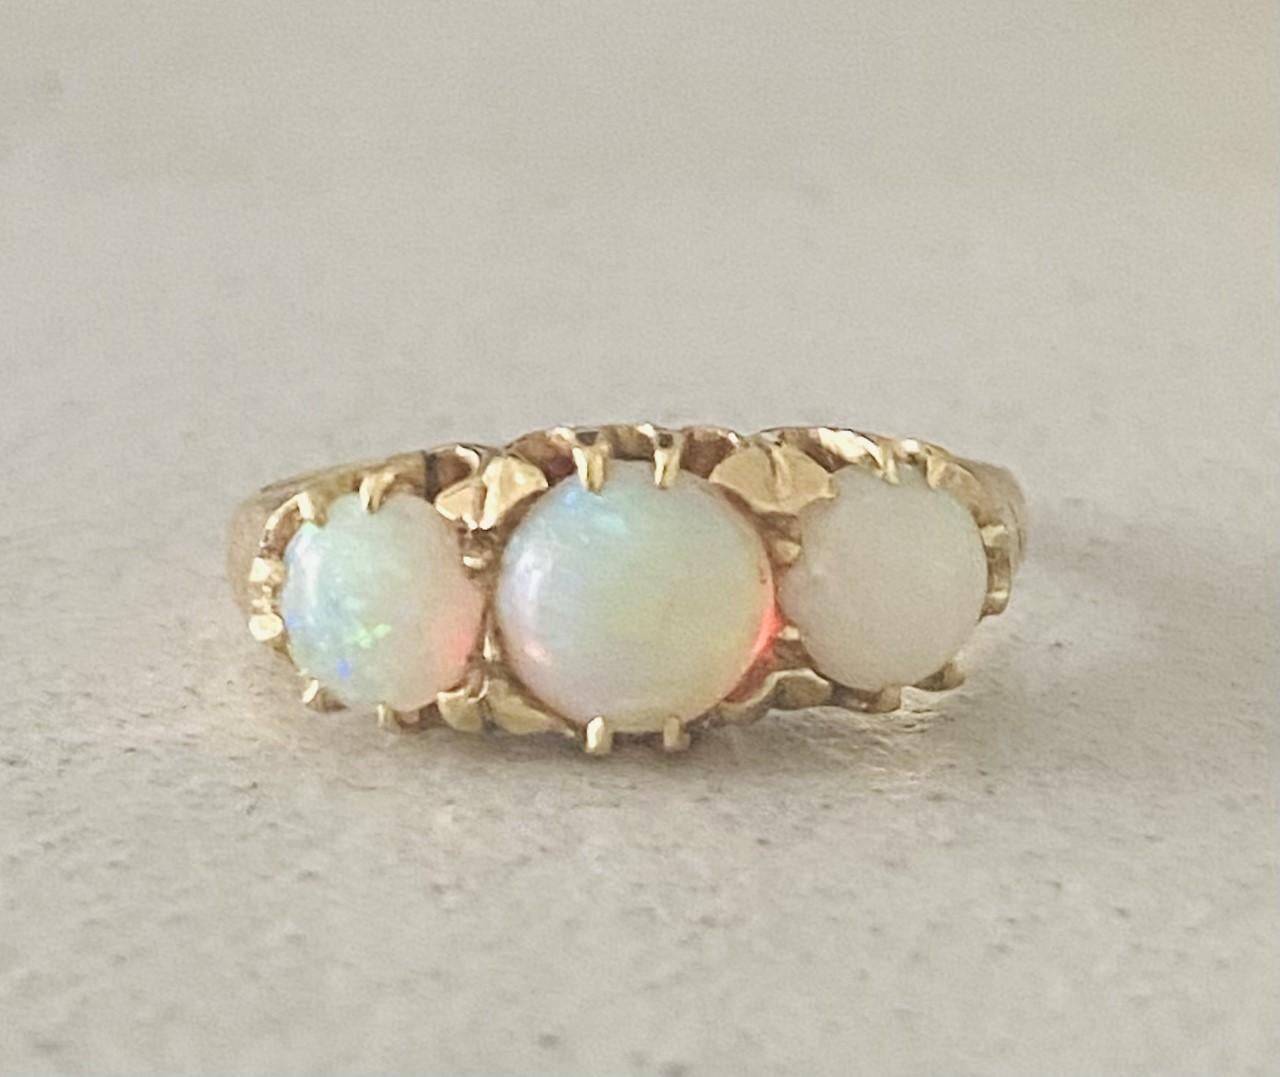 Fabulous preloved ring! This jewel is made of 14 carat yellow gold and holds 3 stunning opals of 1.6 carat. One of kind eye-catcher and in mint condition. In the center you will find the biggest opal. The opals gives you a beautiful play of white